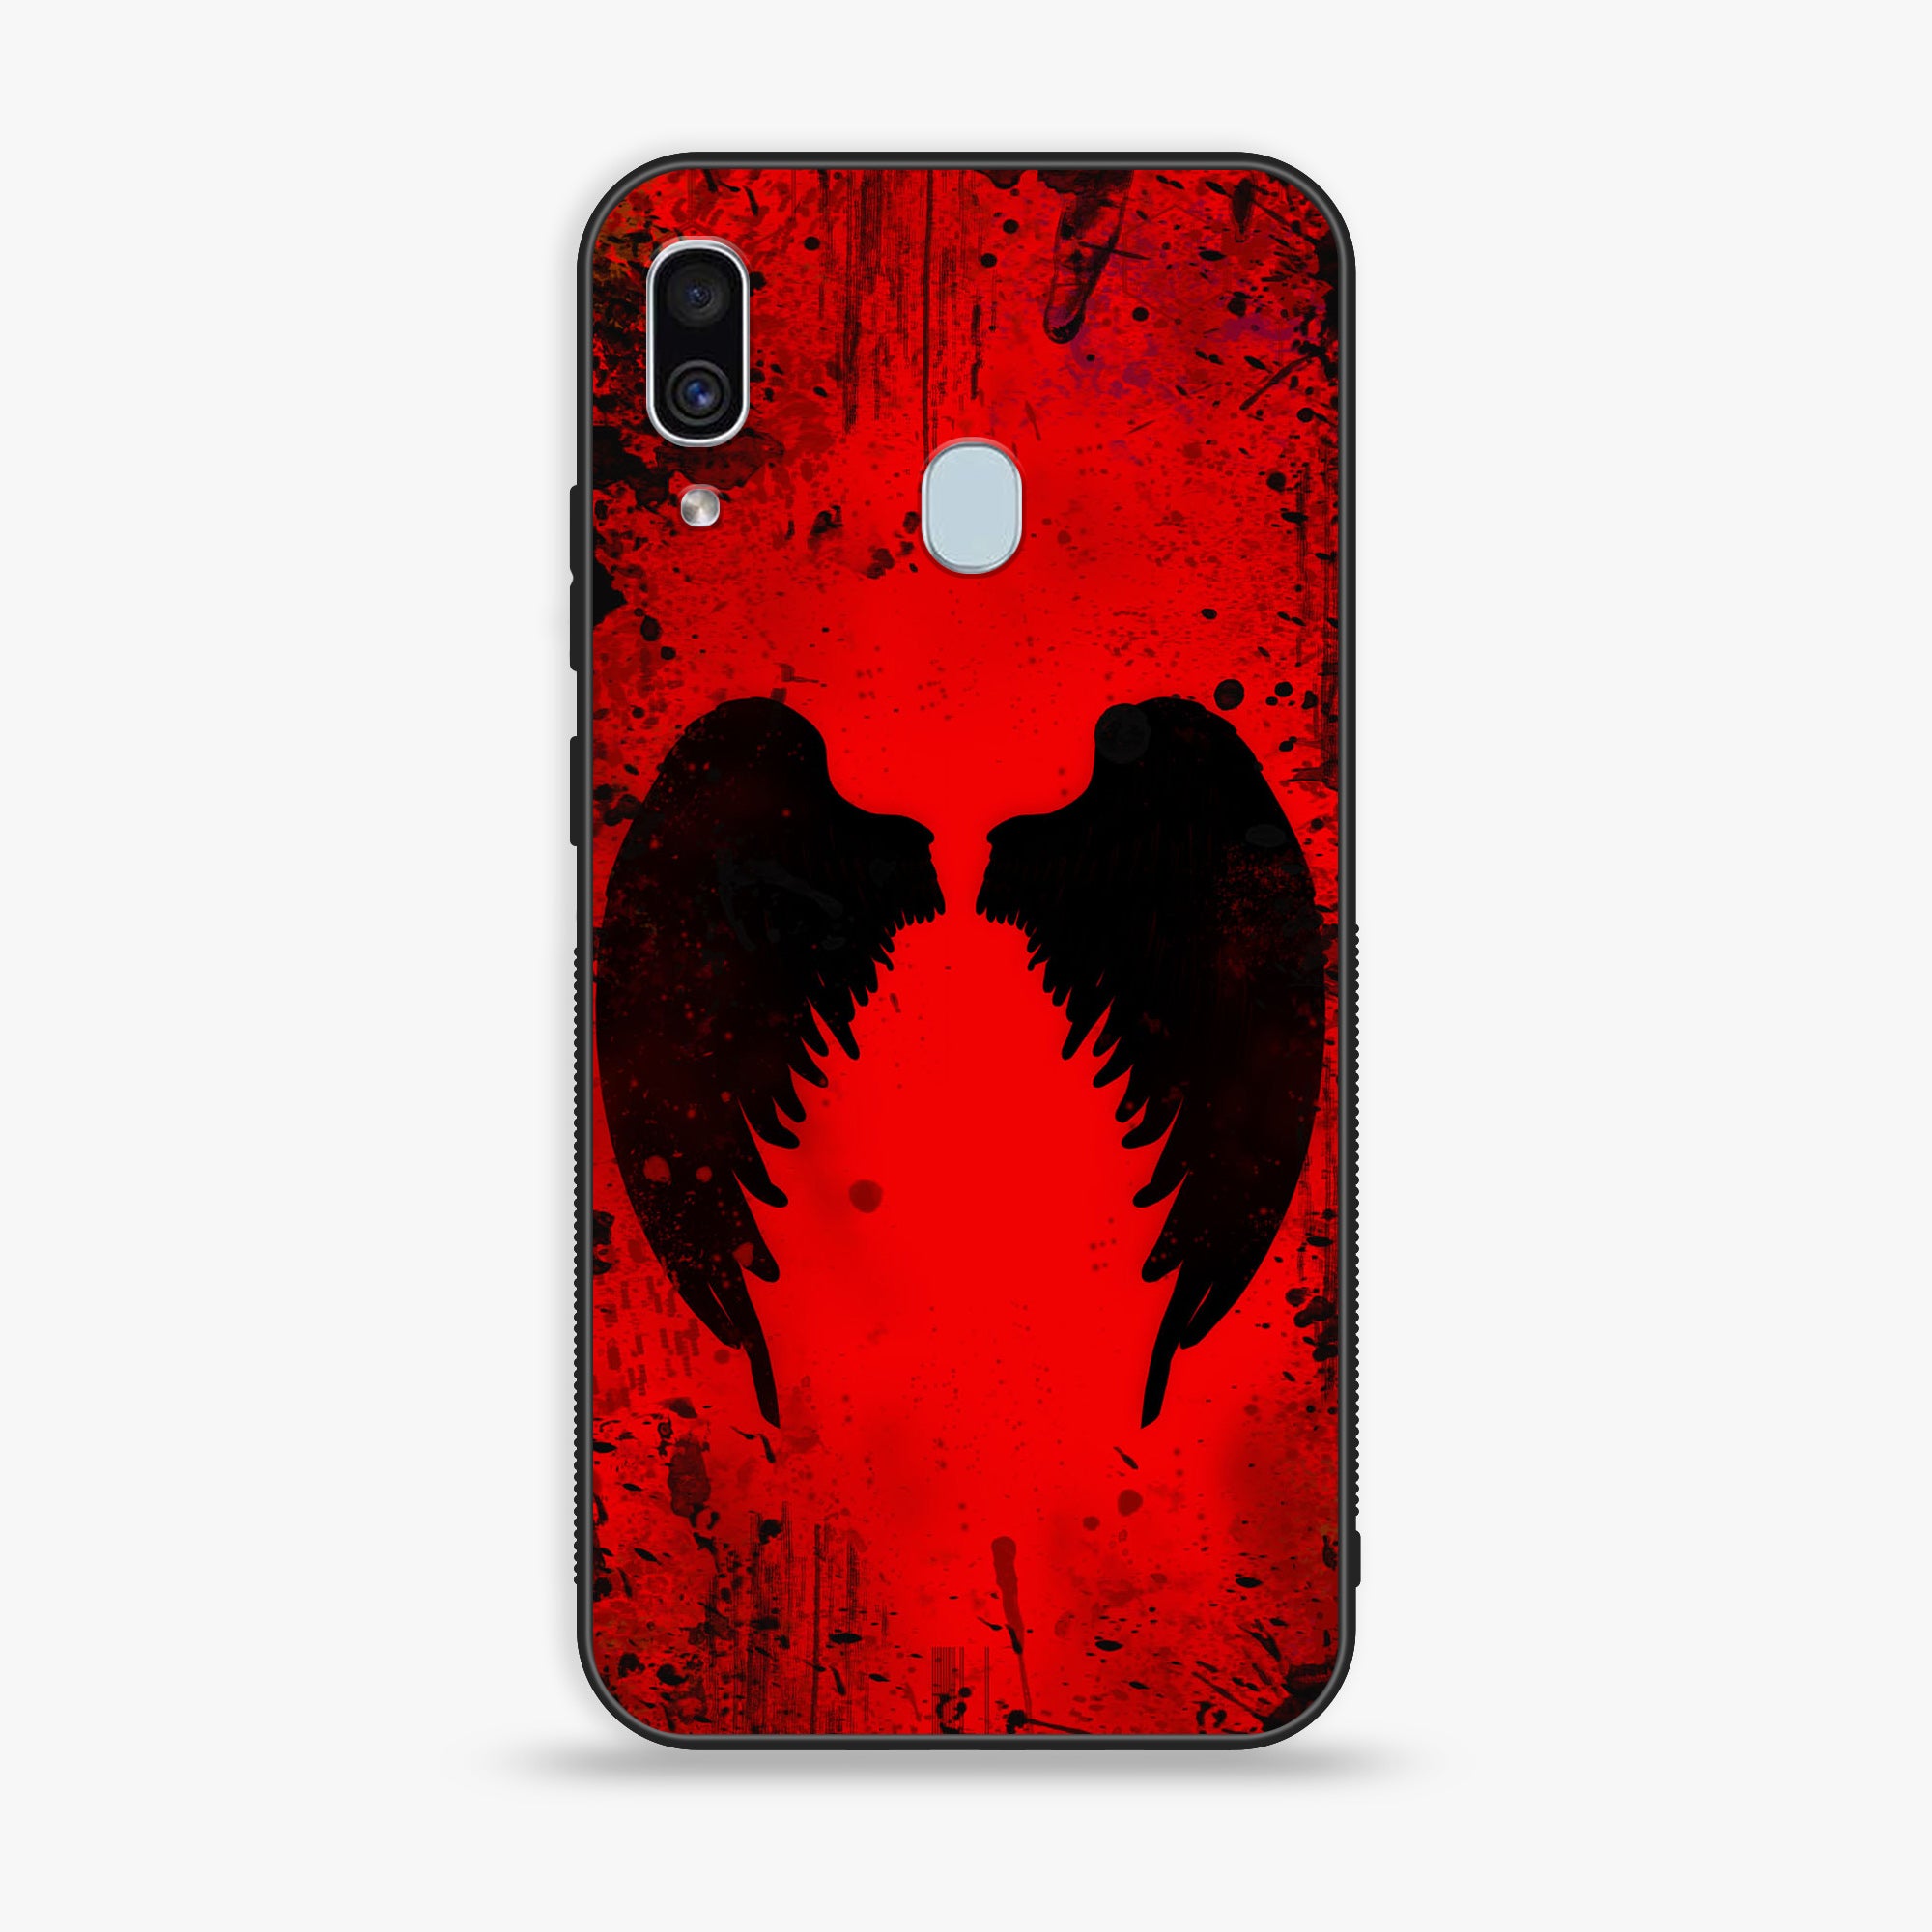 Galaxy A20/A30 - Angel Wings 2.0 Series - Premium Printed Glass soft Bumper shock Proof Case